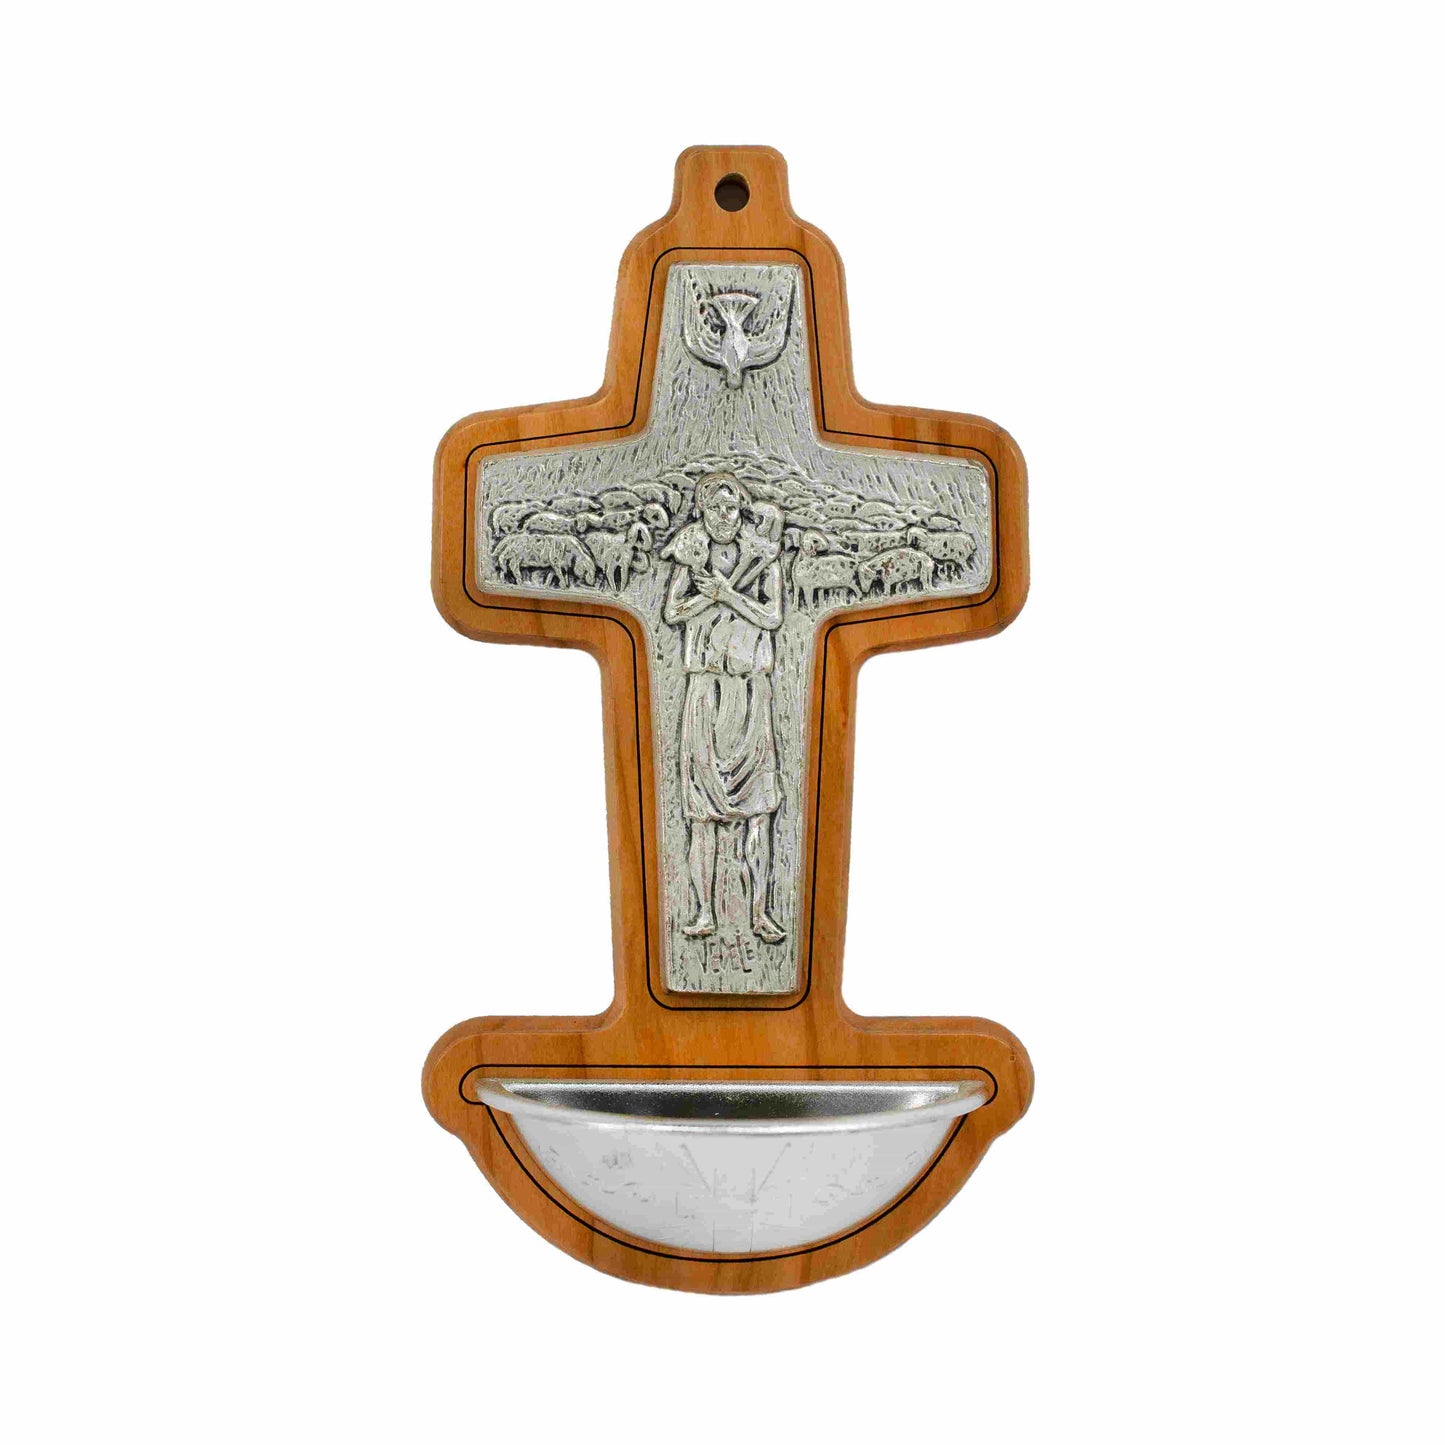 MONDO CATTOLICO Wooden Holy Water Font Pope Francis's Good Shepherd Cross